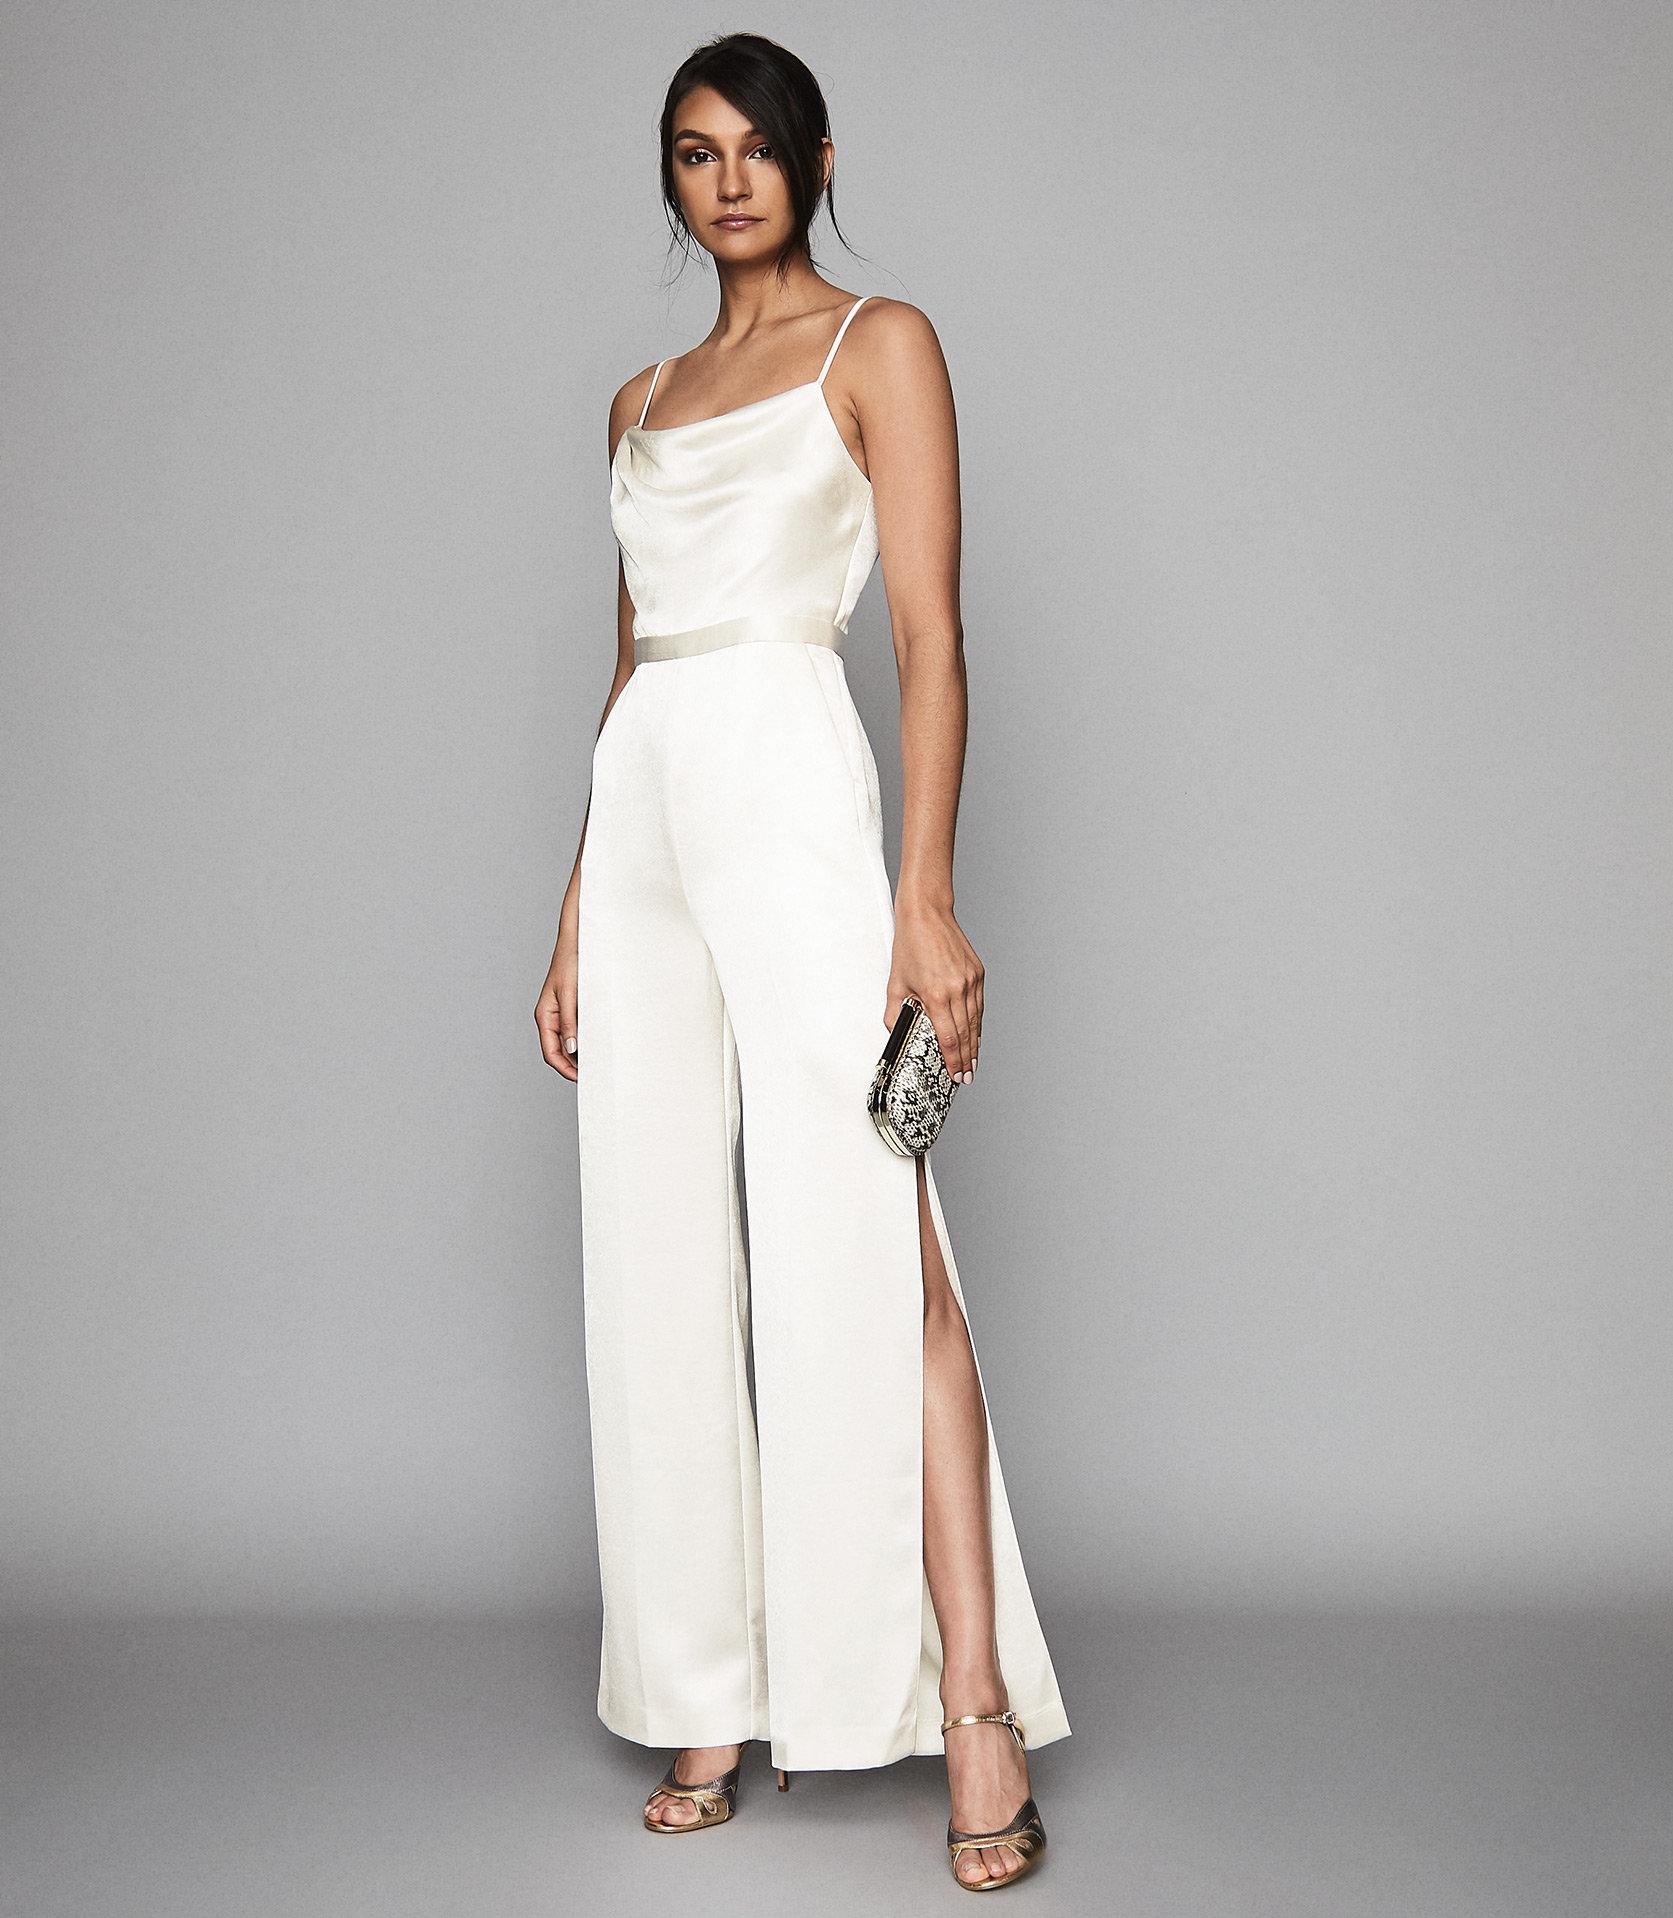 Reiss Satin Cowl Neck Jumpsuit in White - Lyst